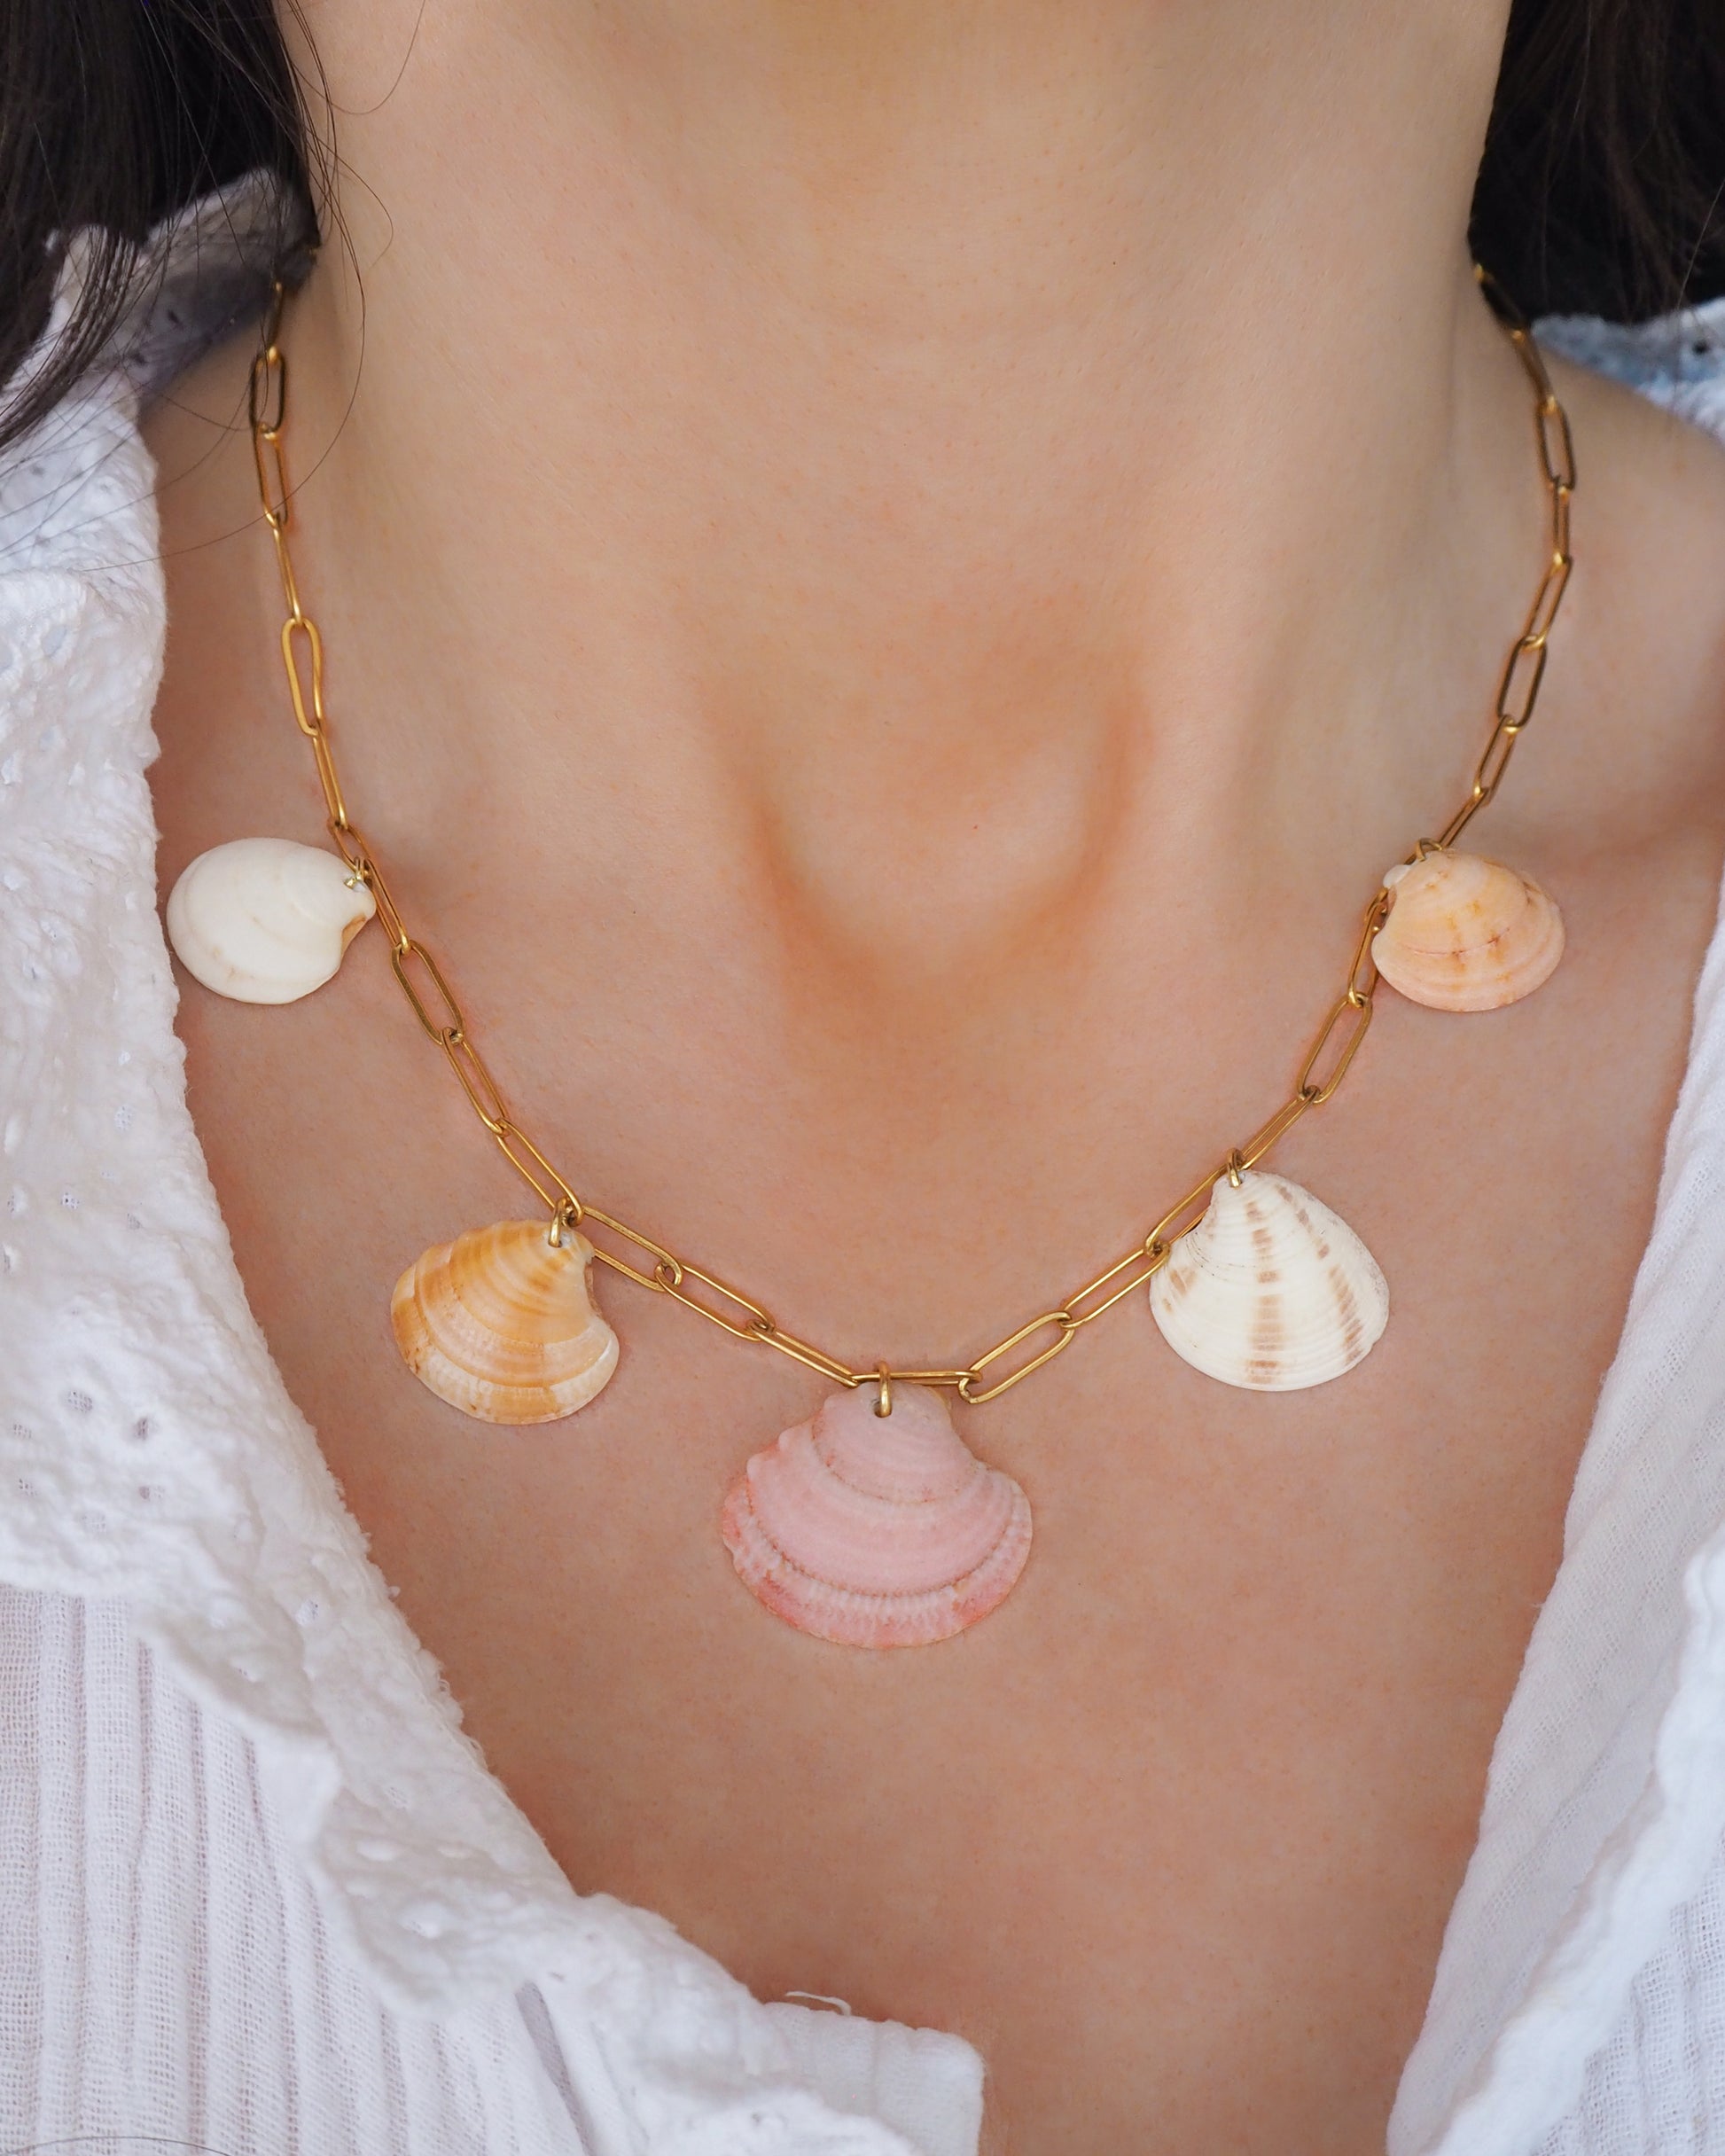 Venus Shell Charm Necklace with Gold Chain on model, Real Shell Jewelry, Sea by Lou,